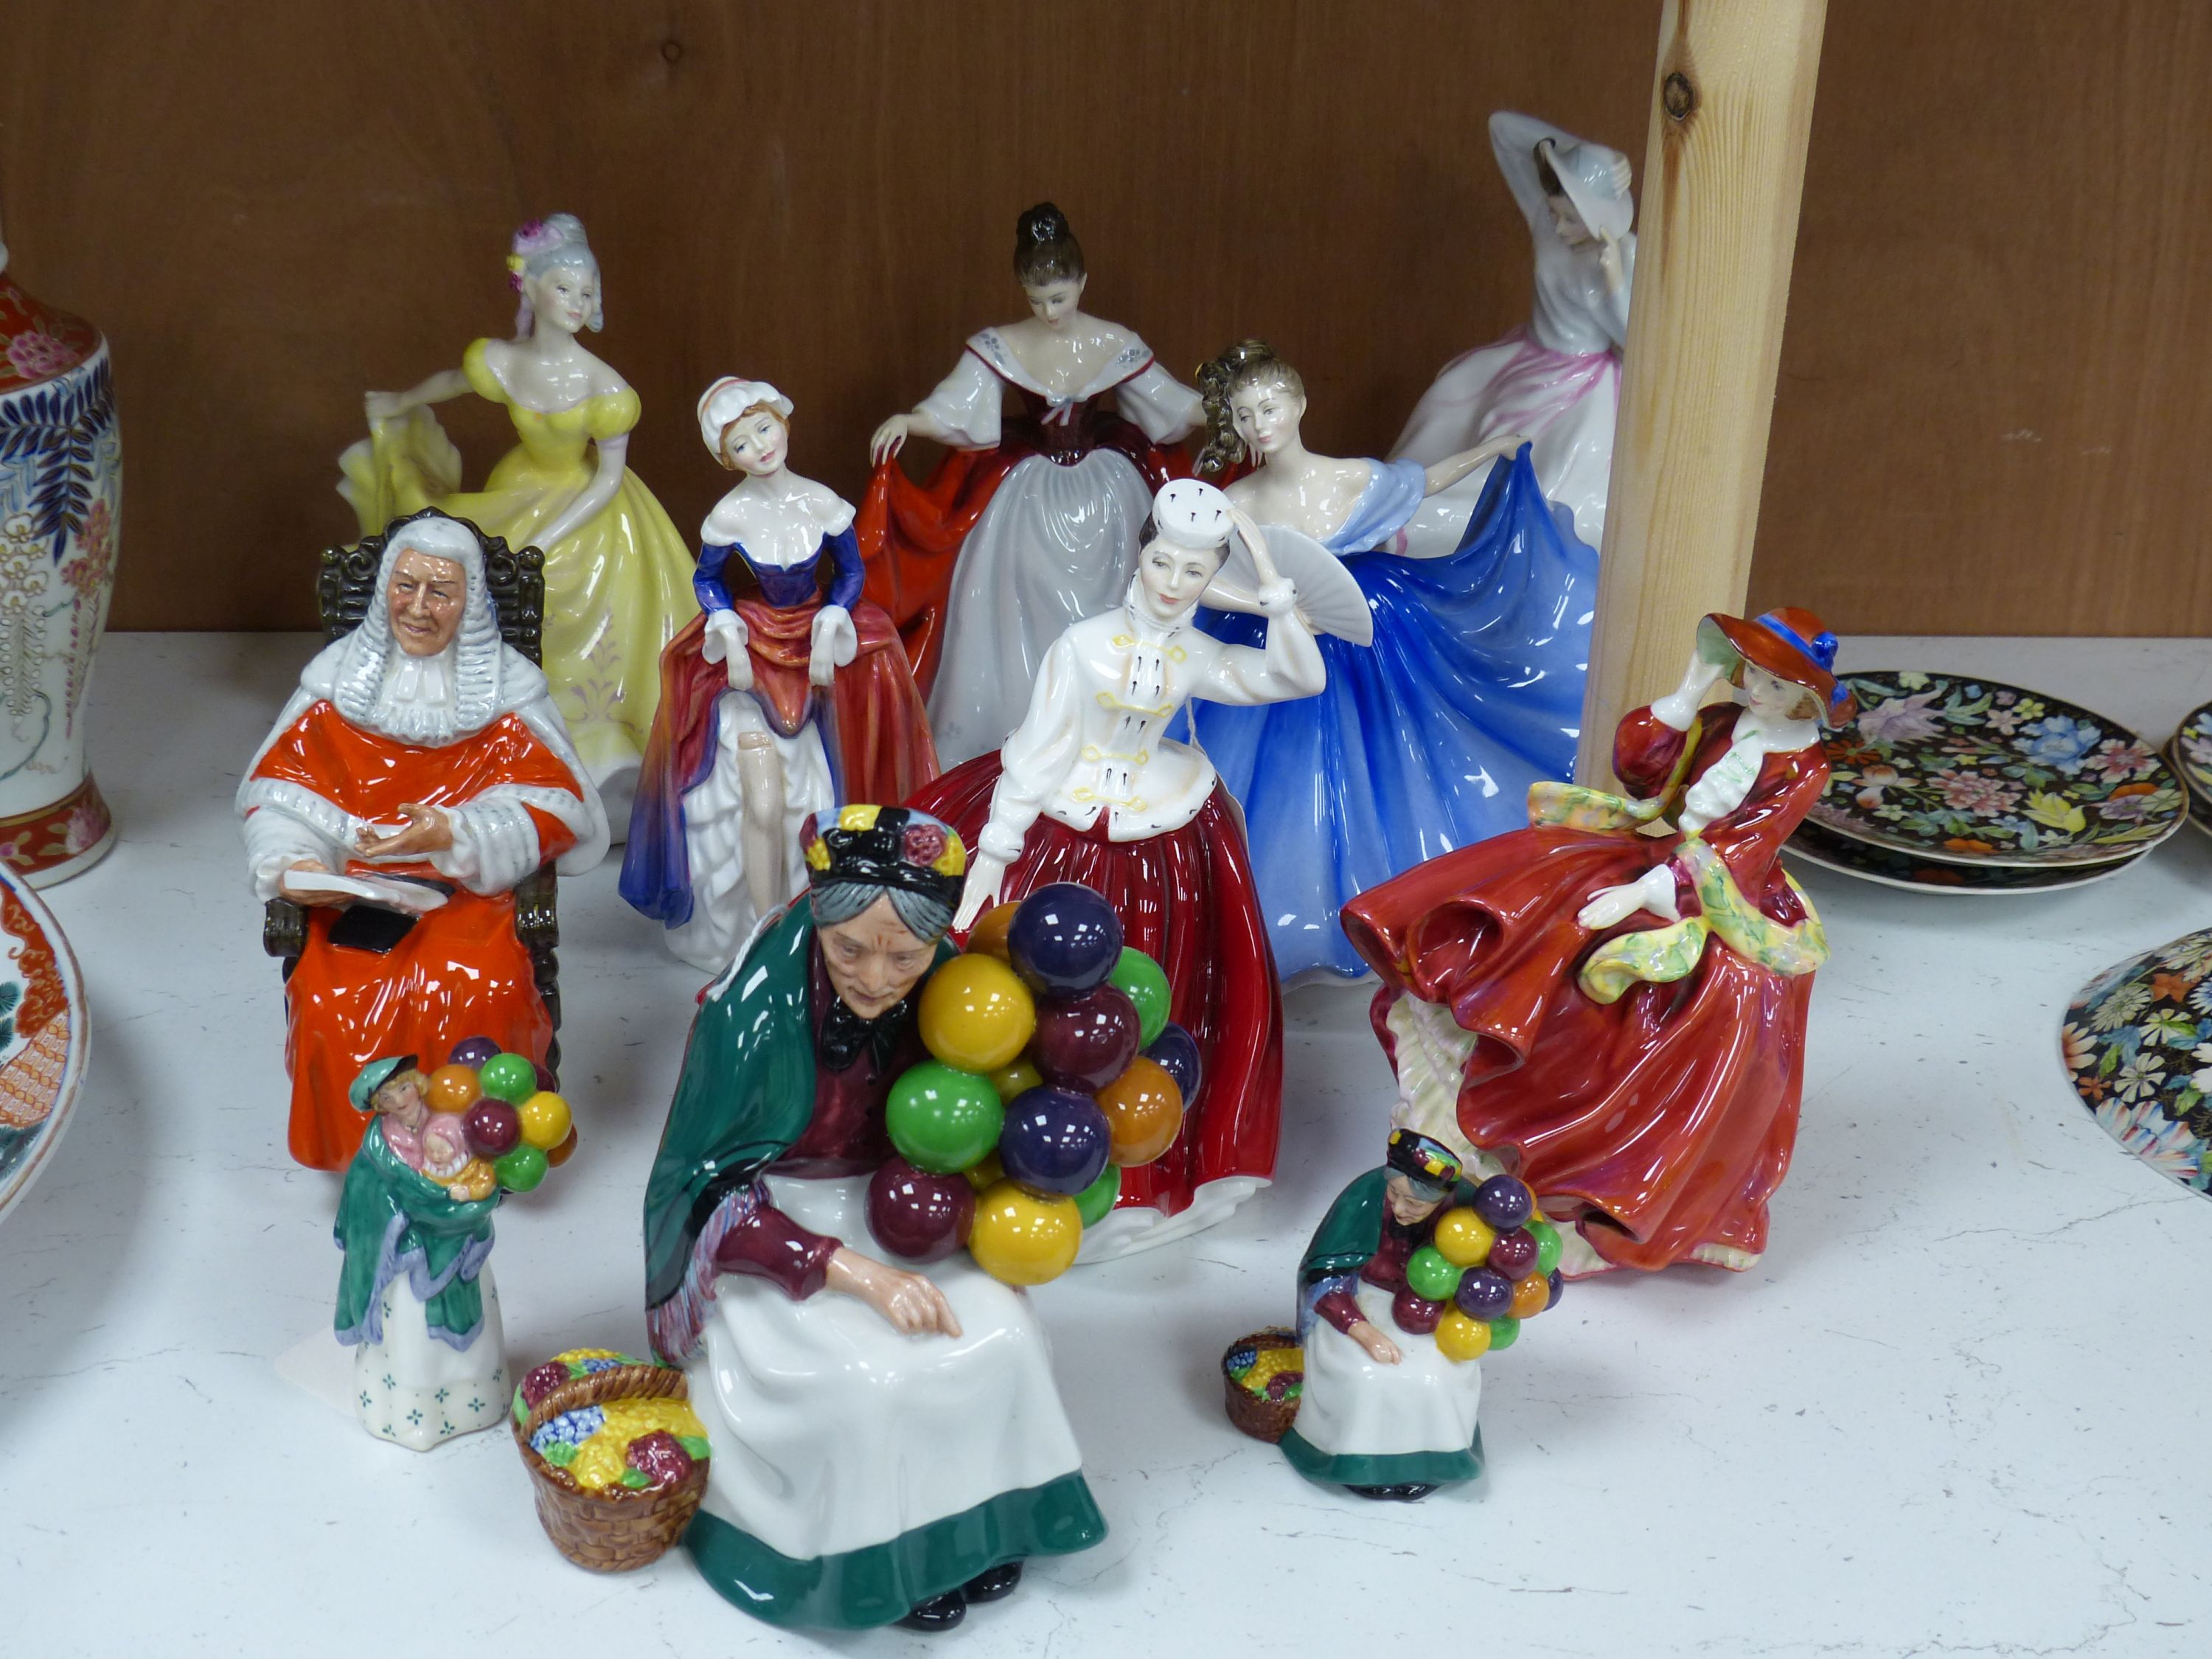 Ten Royal Doulton figurines, including 'Sara', 'The Judge', 'The Old Balloon Seller', 'Elaine' and others